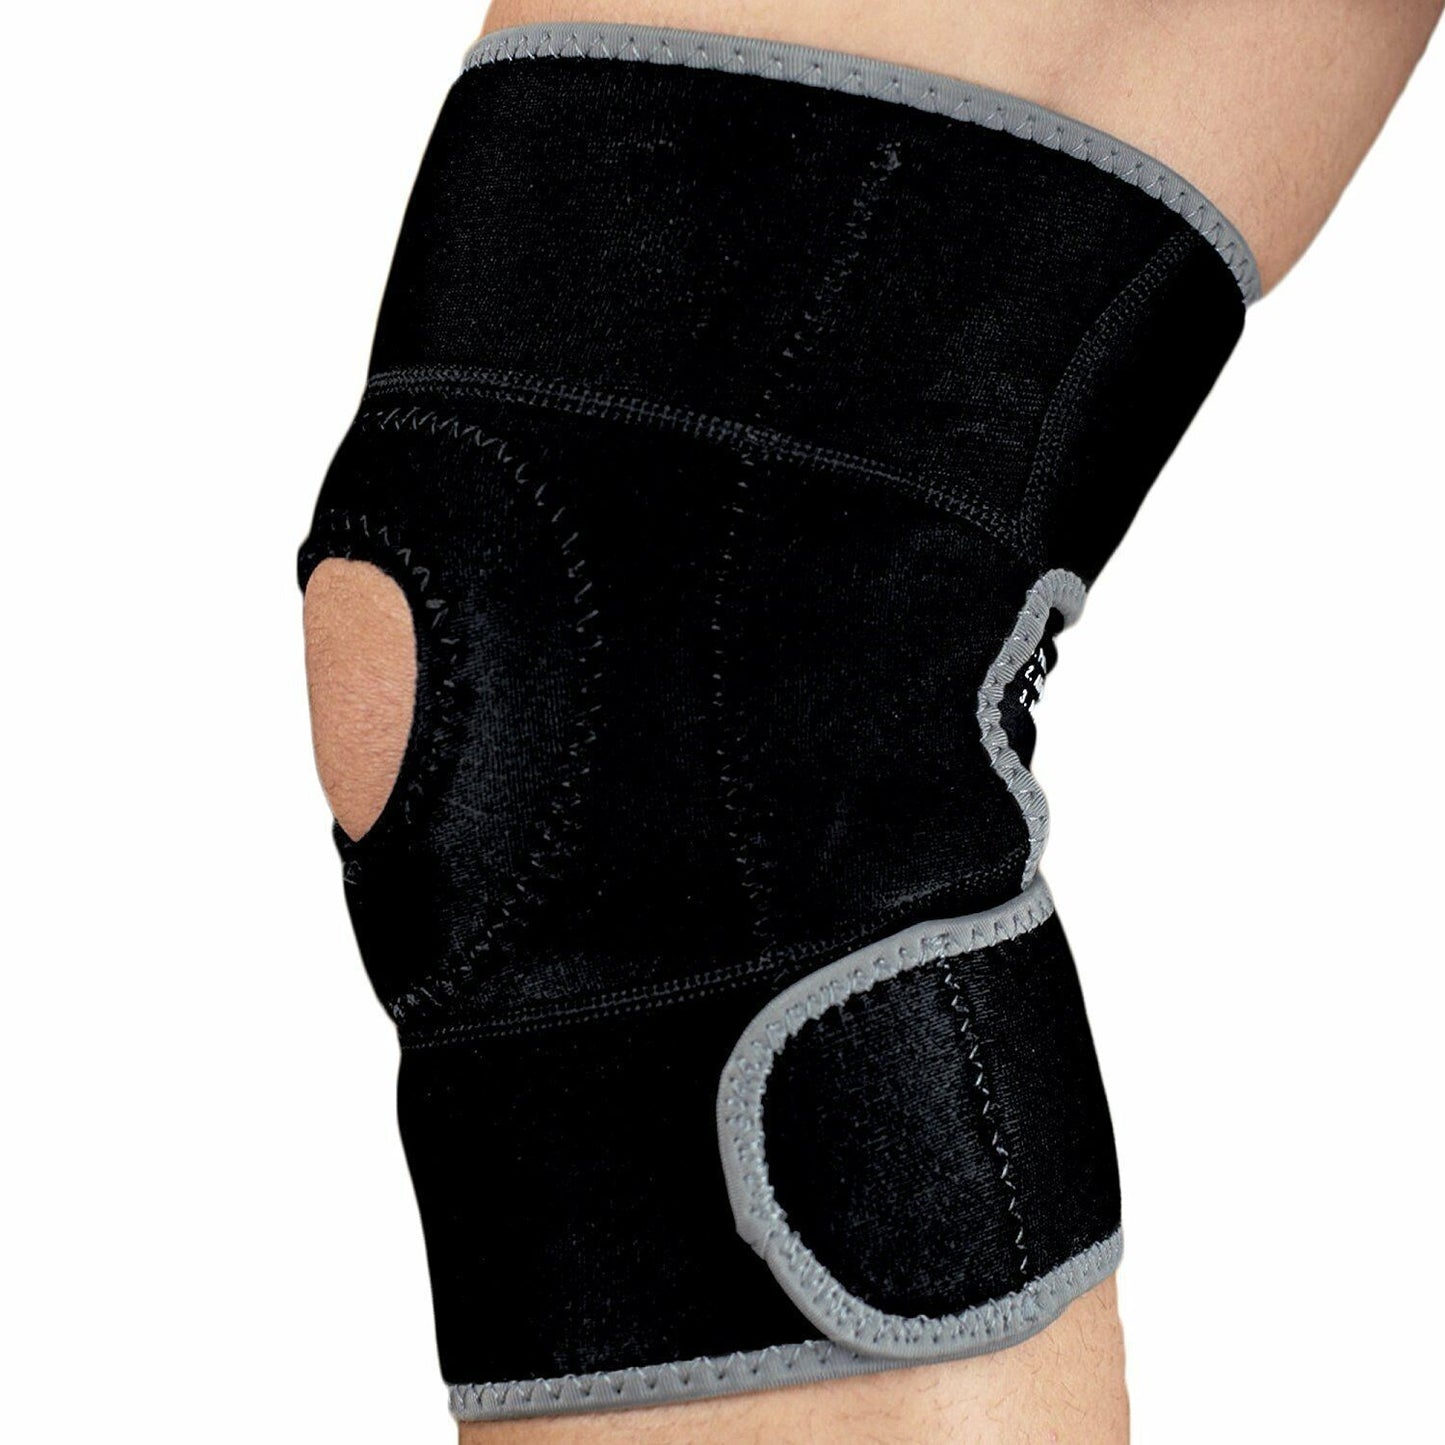 Ace Knee Support Injury & Arthritic Compression Adjustable Sizing Moderate 1ct